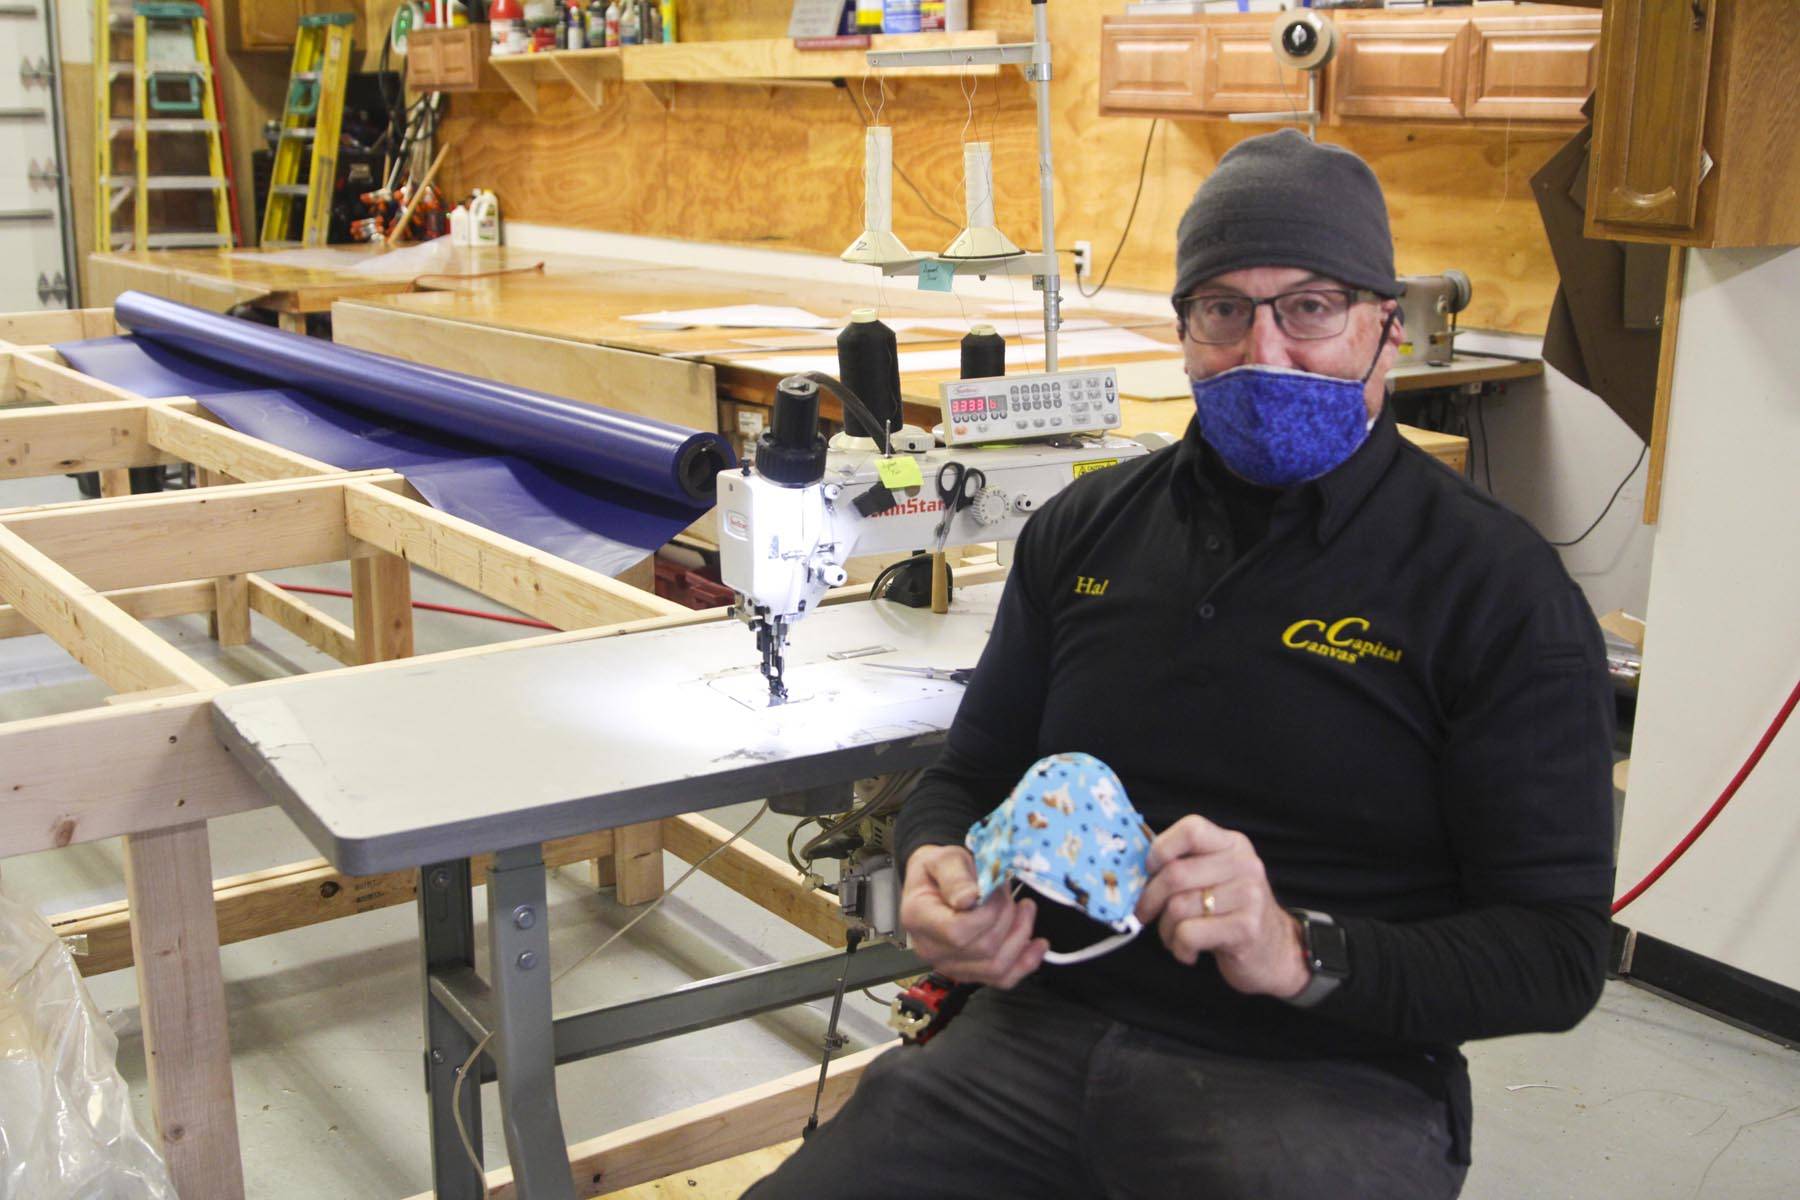 Hal Daugherty shows off his cloth mask design, to be put into production at his all-volunteer Southeast Regional Personal Protective Equipment Fabrication Facility, stood up in his sterilized workspace at Capital Canvas, March 27, 2020. (Michael S. Lockett | Juneau Empire)